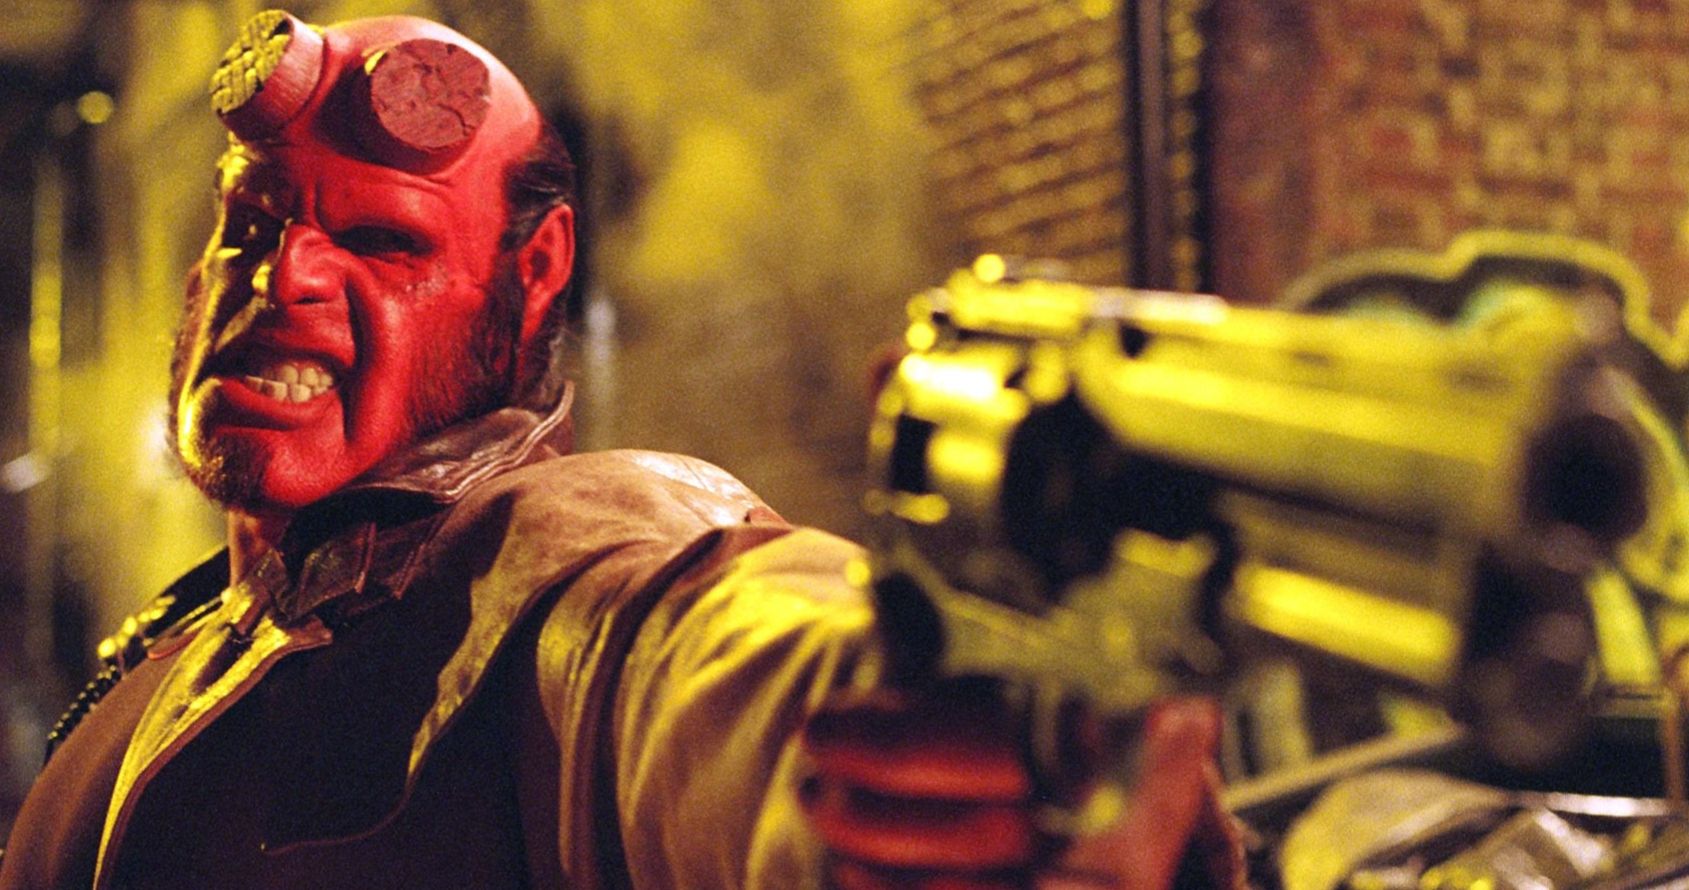 Guillermo Del Toro's Hellboy Gets Director's Cut, Theatrical 4K Blu-ray for 15th Anniversary